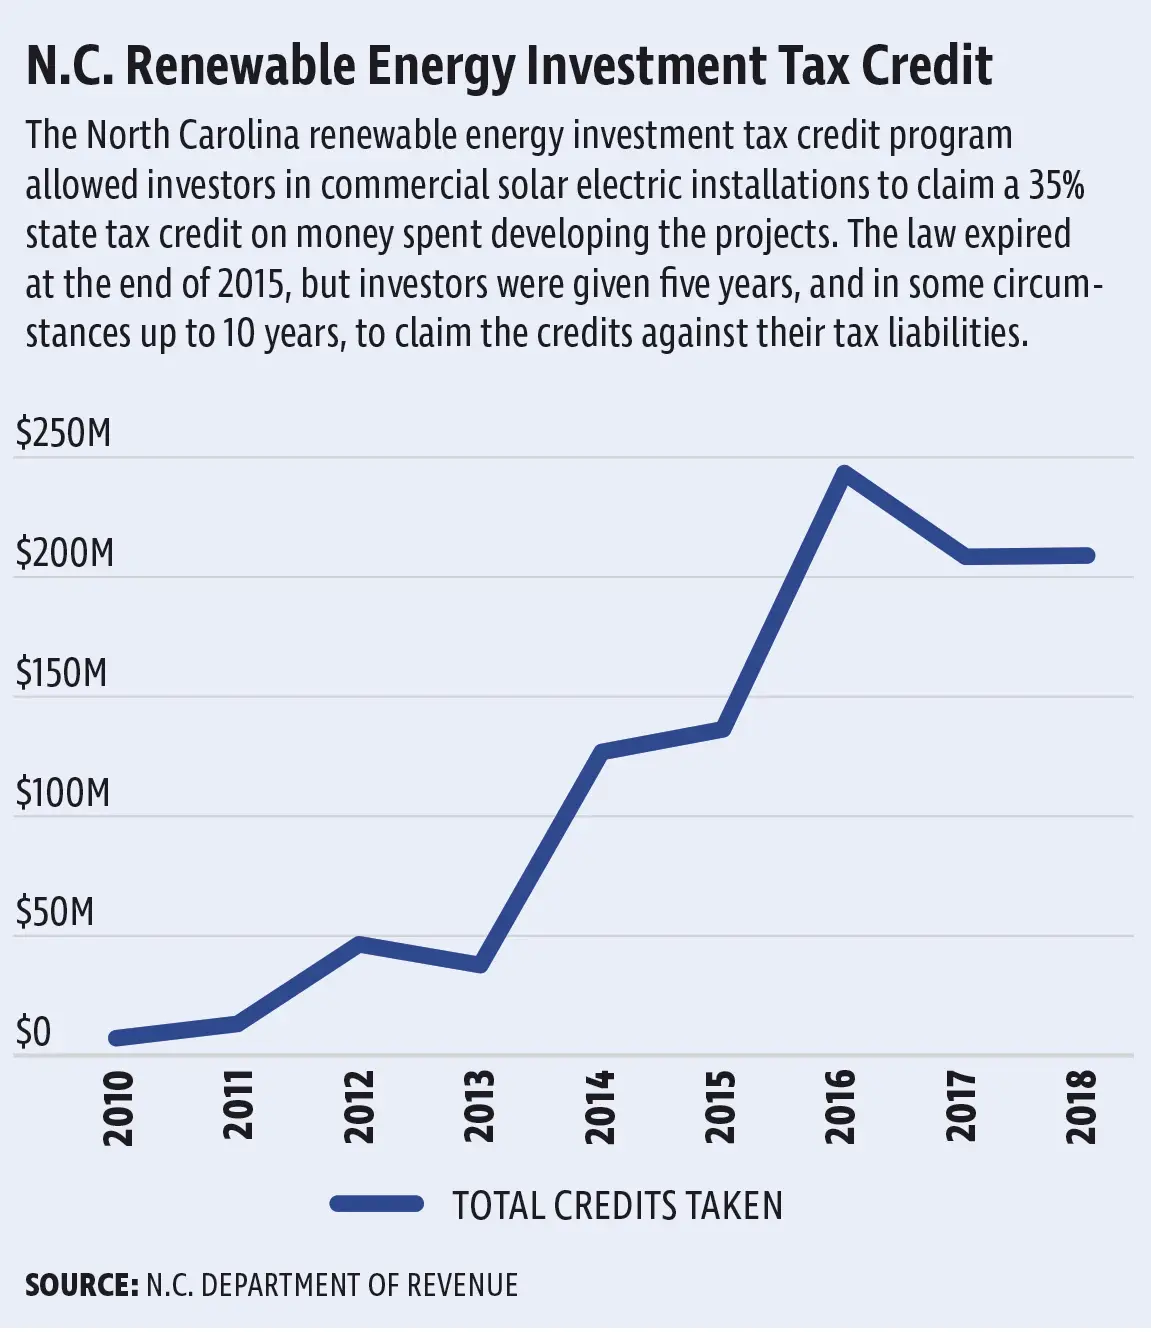 N.C. has issued more than $1 billion in renewable energy tax credits ...